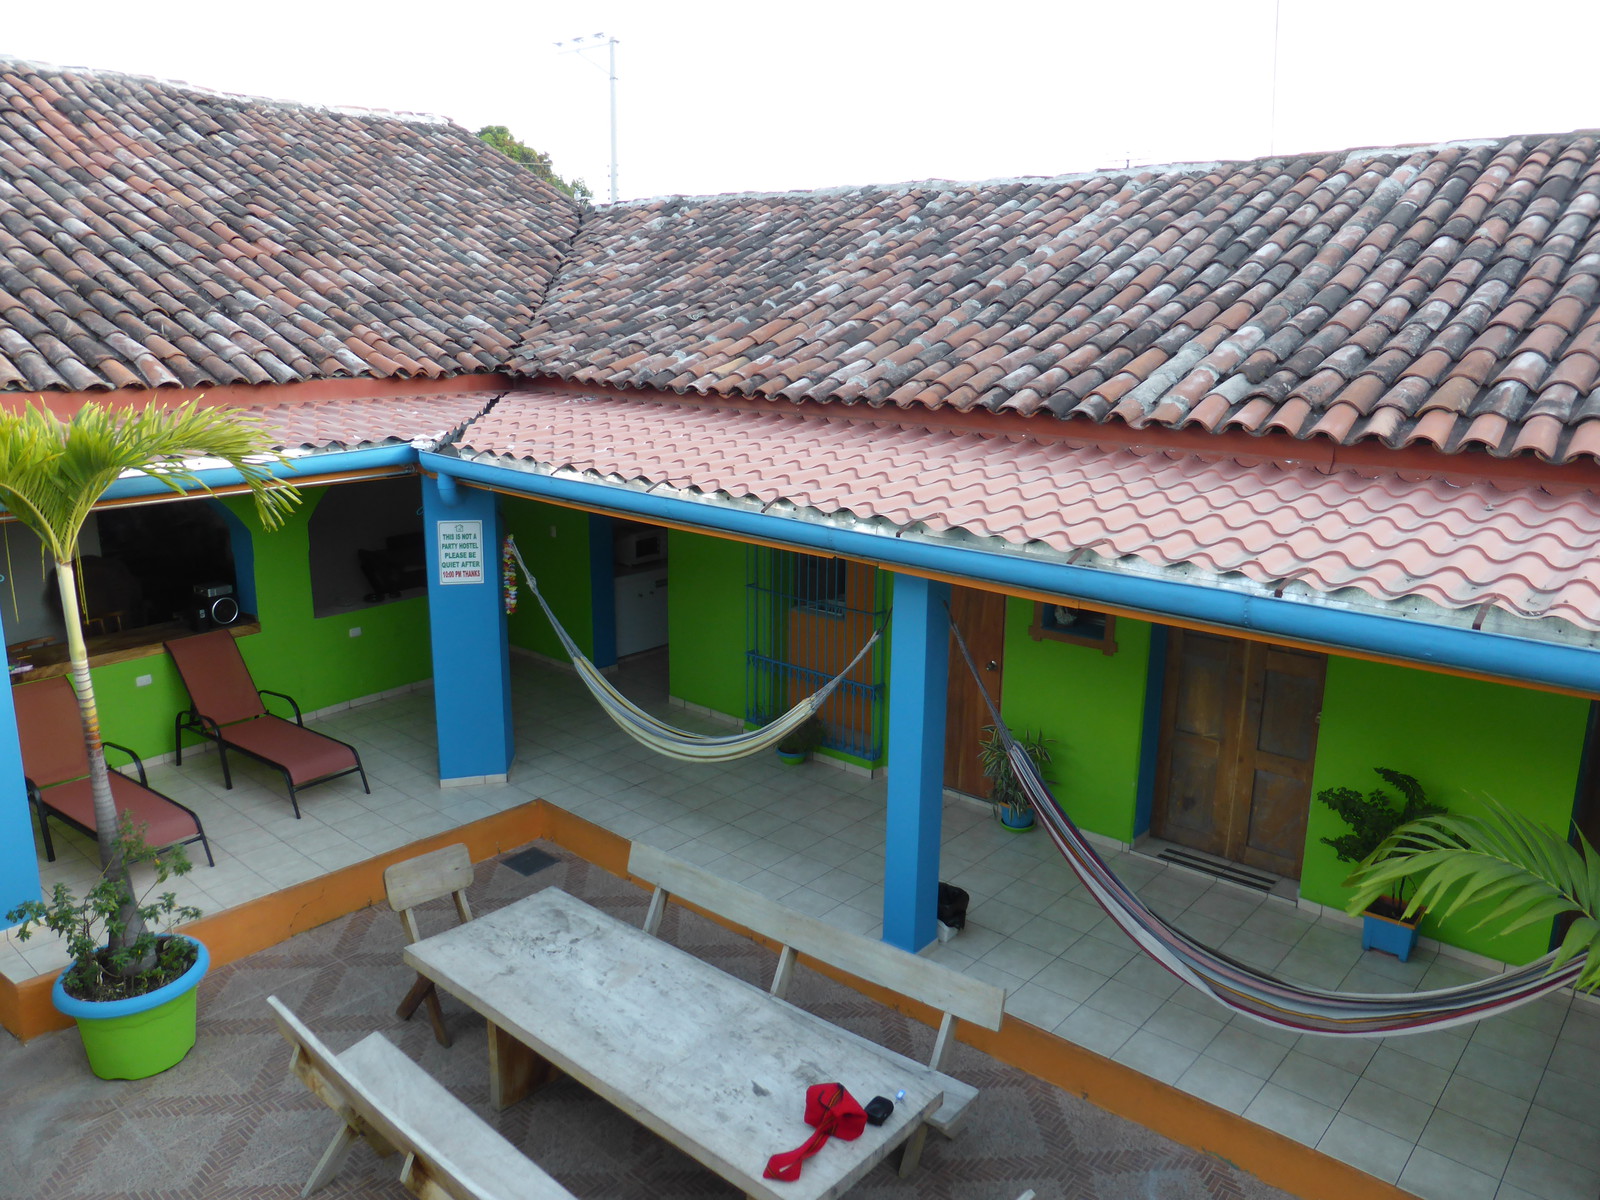 The Casa Verde Hostel is a lovely home from home in Santa Ana